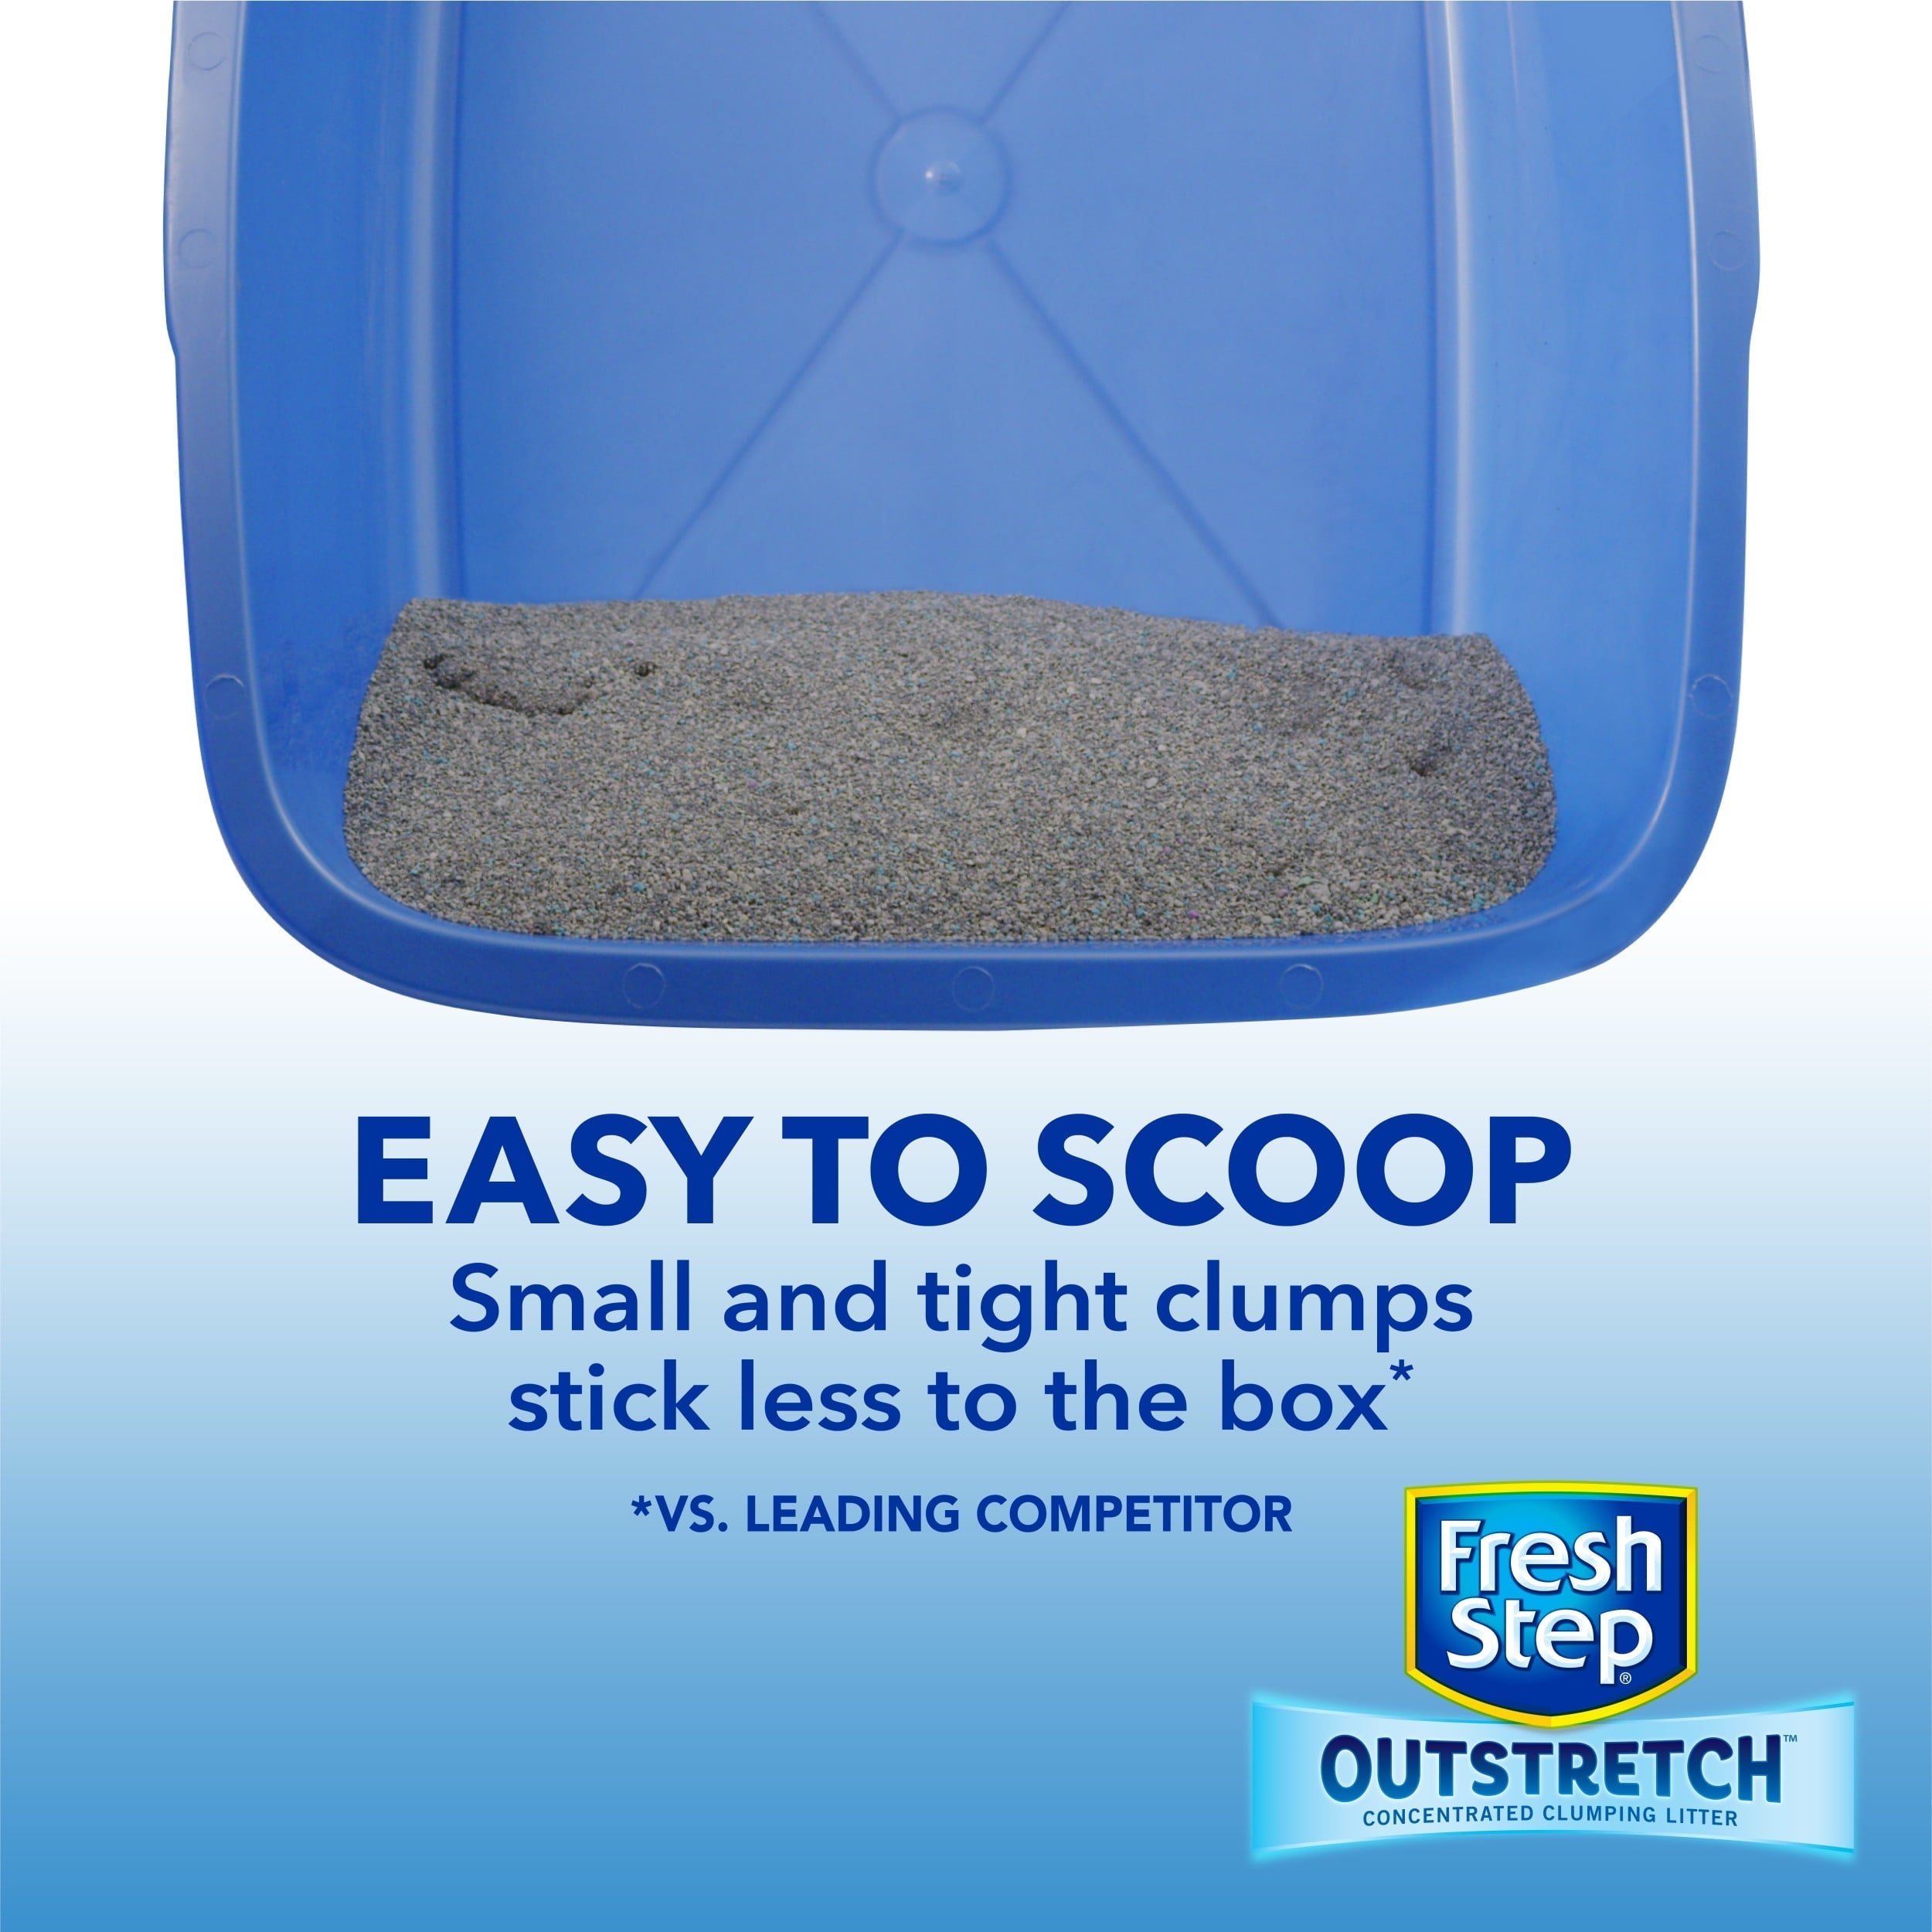 Wholesale prices with free shipping all over United States Fresh Step Outstretch Long Lasting Concentrated Clumping Cat Litter, Unscented, 19 lbs - Steven Deals